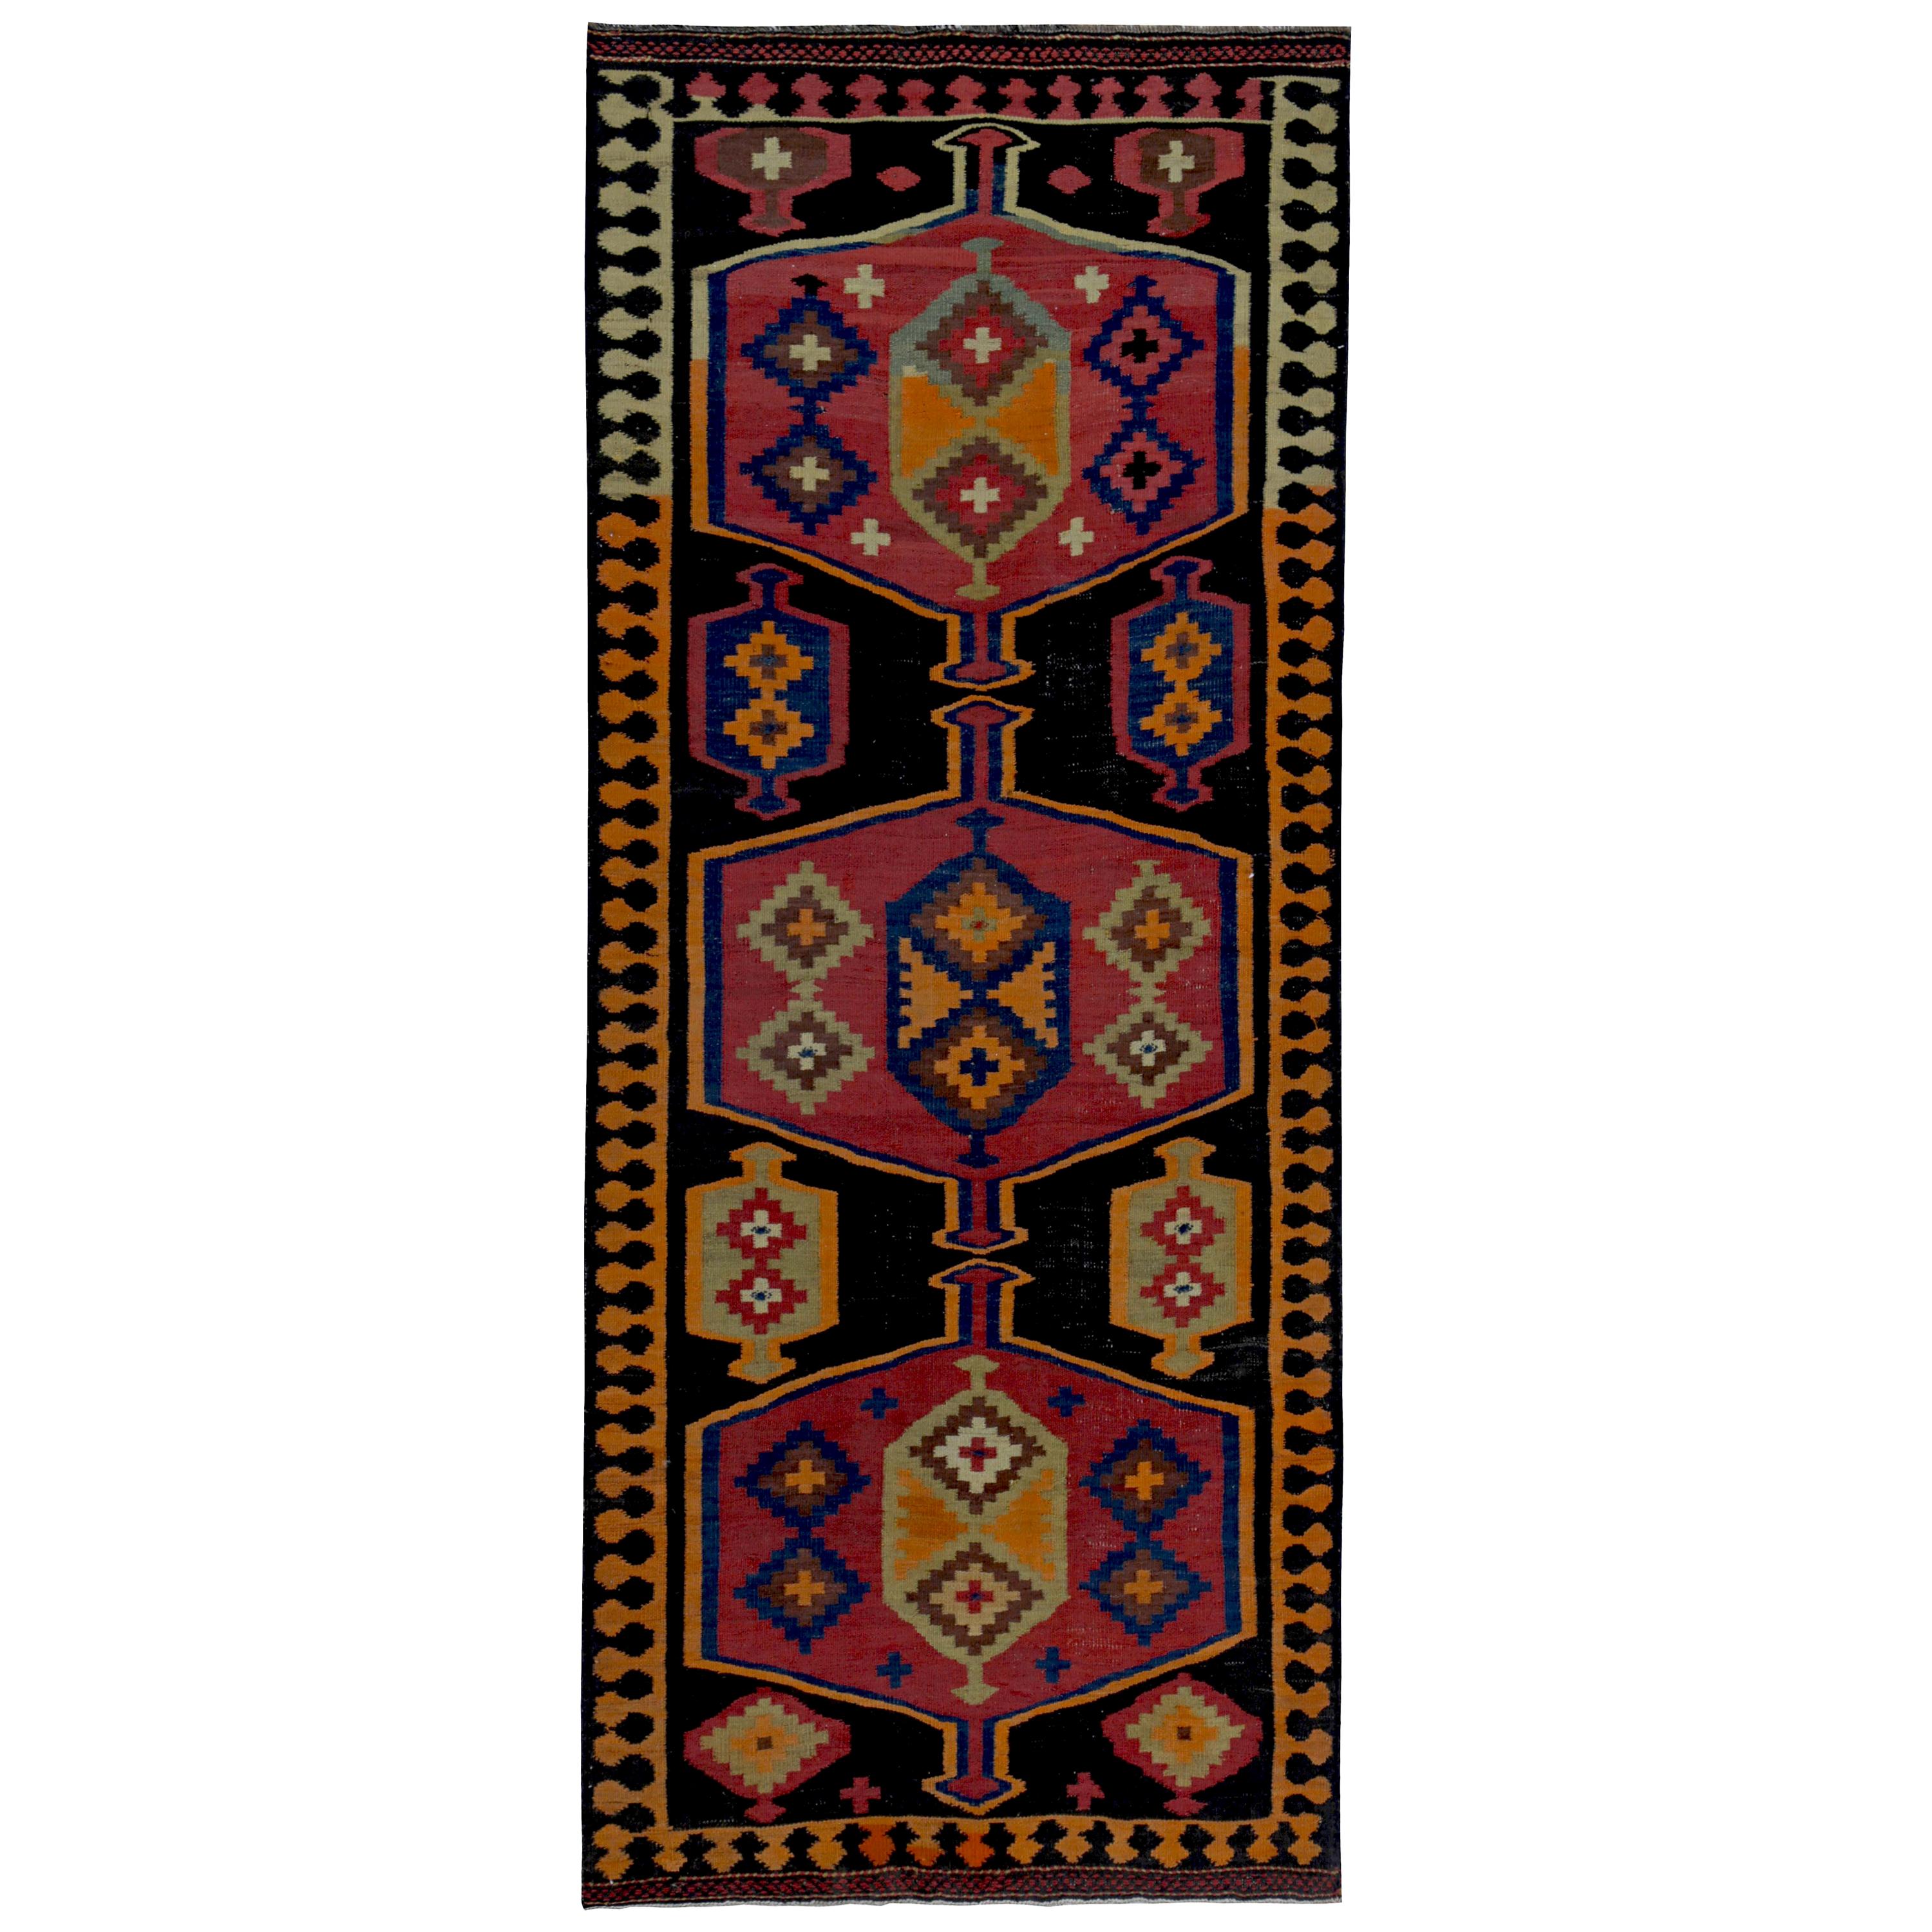 Turkish Kilim Runner Rug with Tribal Details in Red, Orange and Black For Sale